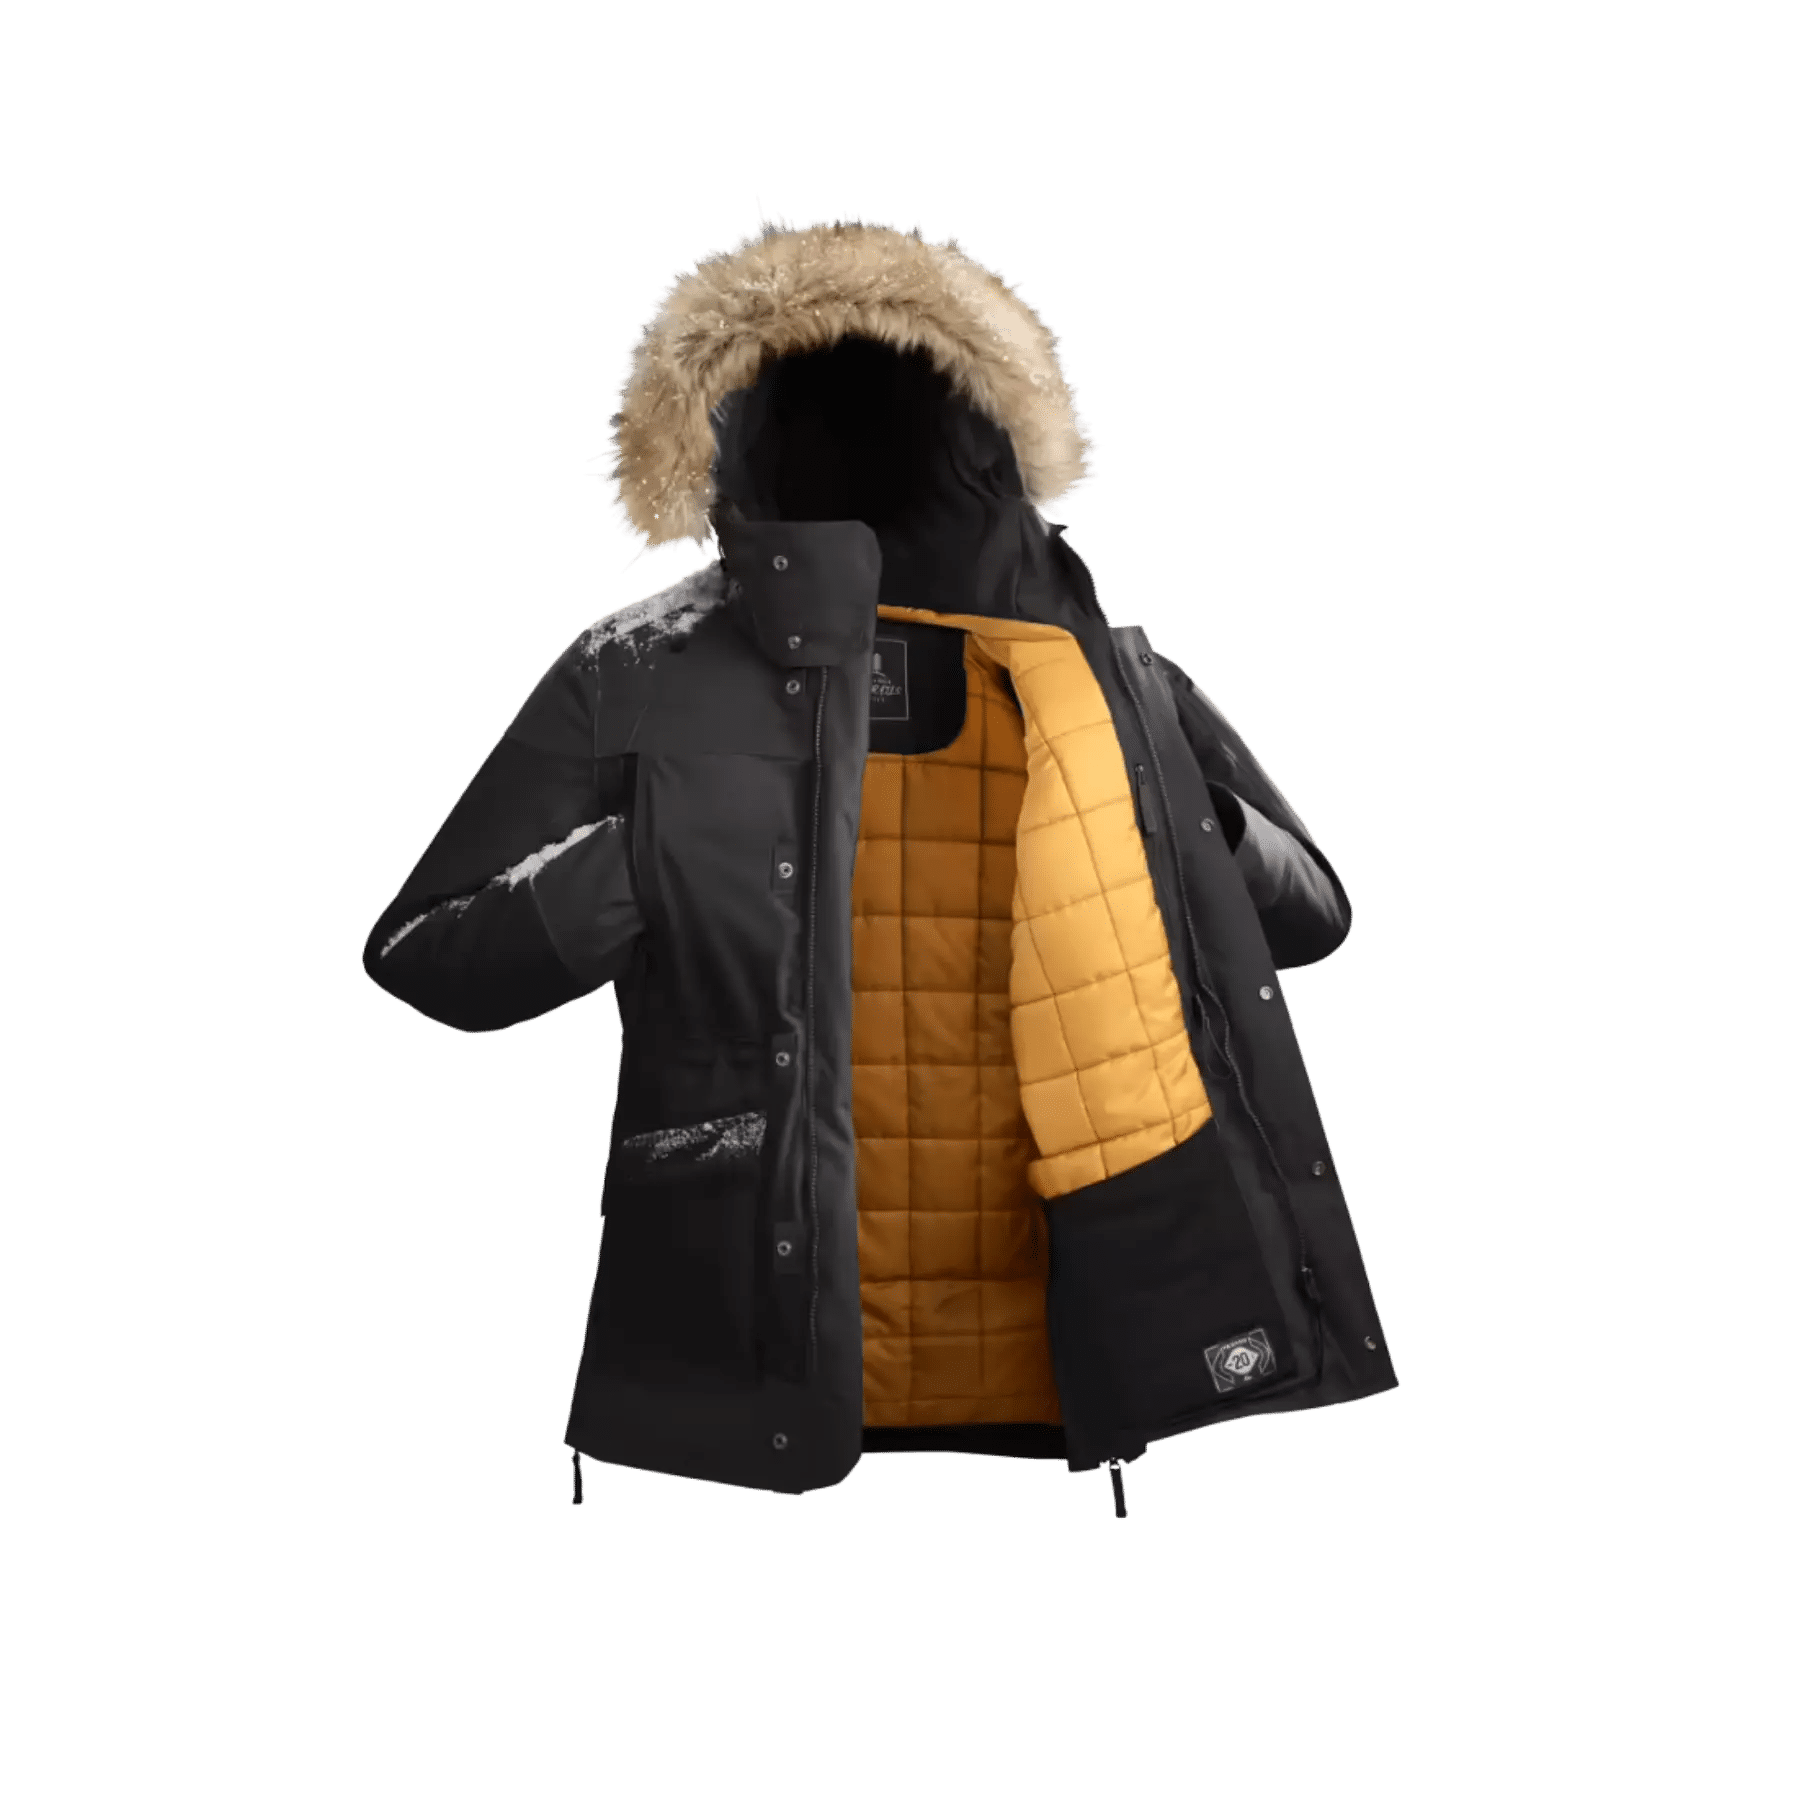 These are product images of Men Parka Jacket on rent by SharePal.